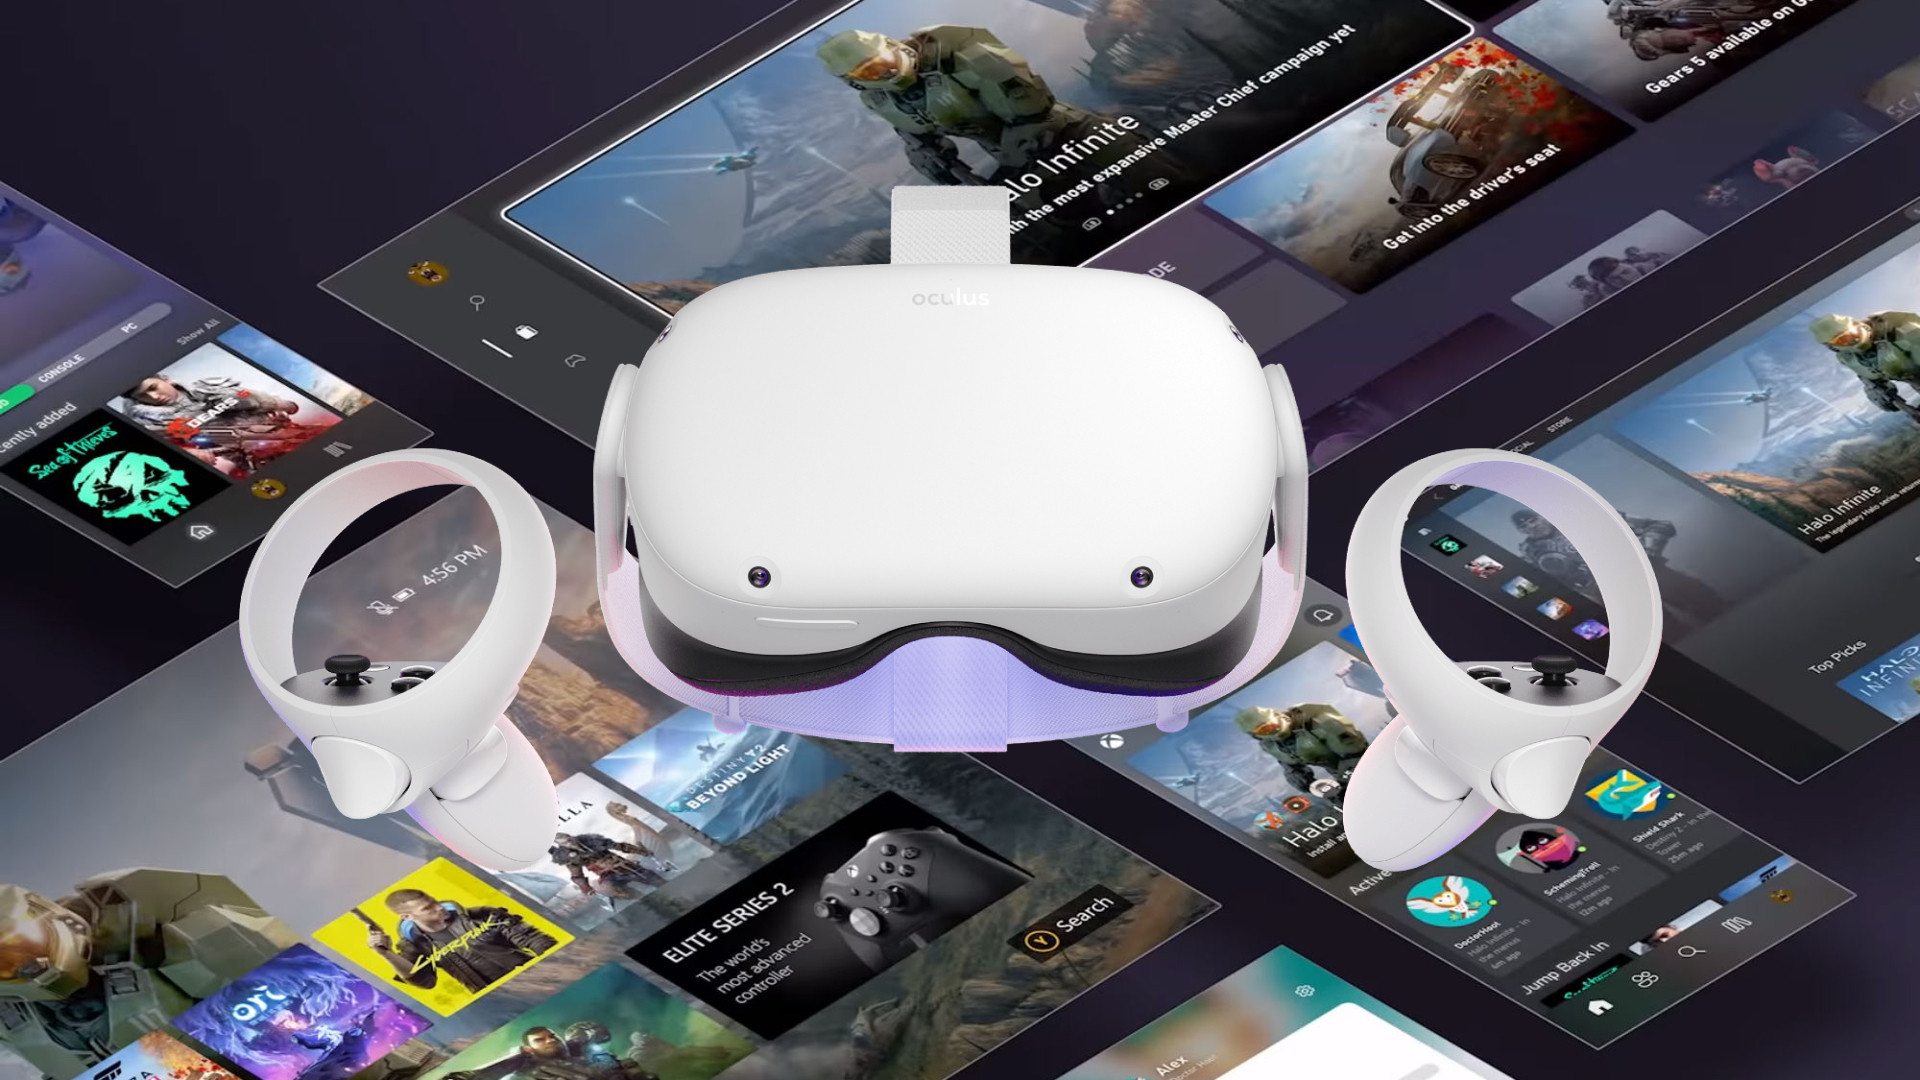 Oculus Quest 2 is getting Xbox Game Pass, but only xCloud streaming